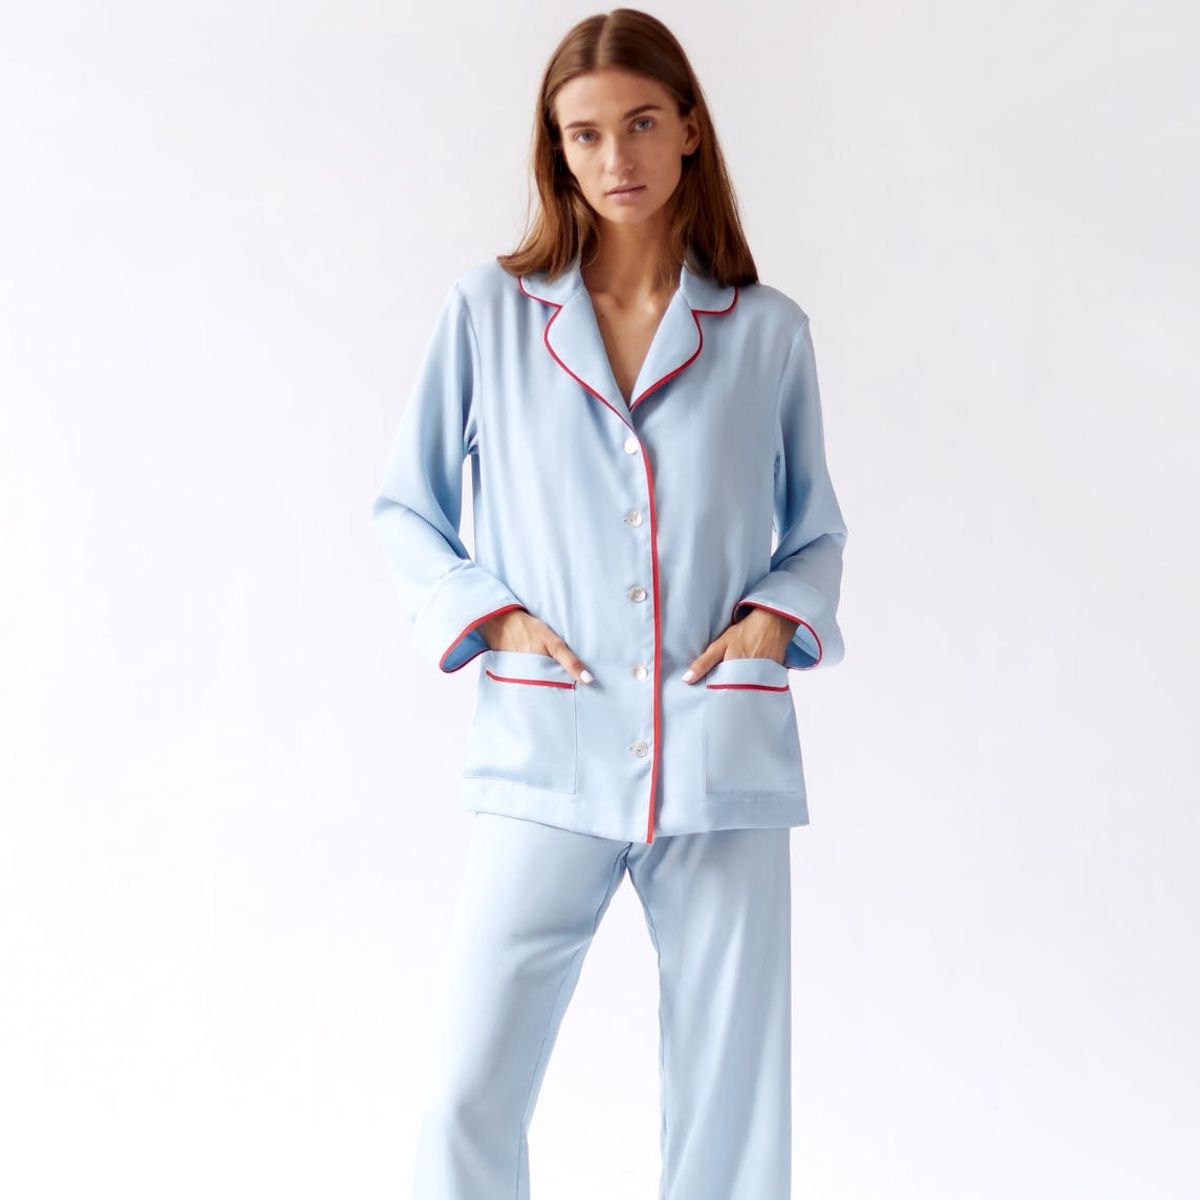 13 Girls’ Night In Loungewear Looks That Are Better Than Valentine’s Day Lingerie